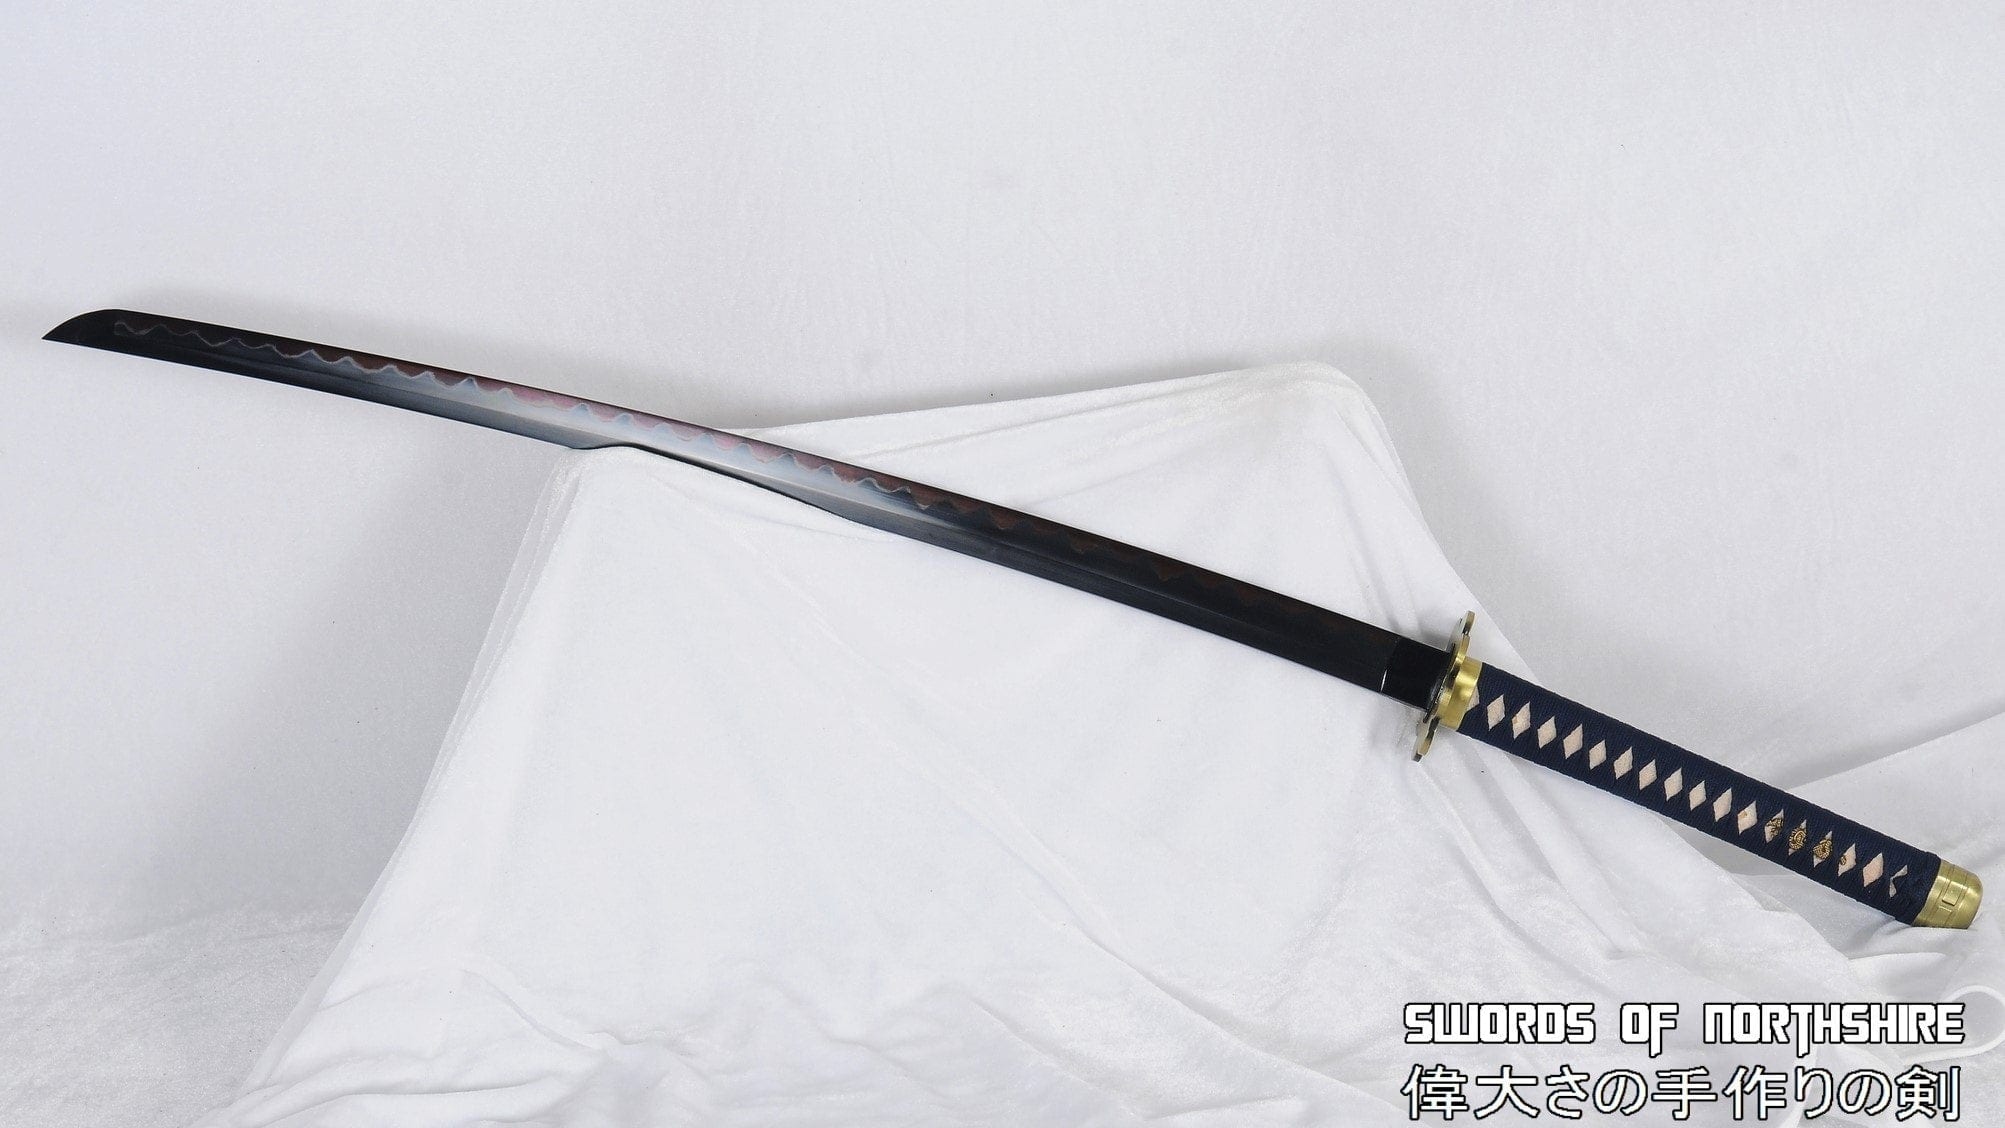 Sword - from One Piece